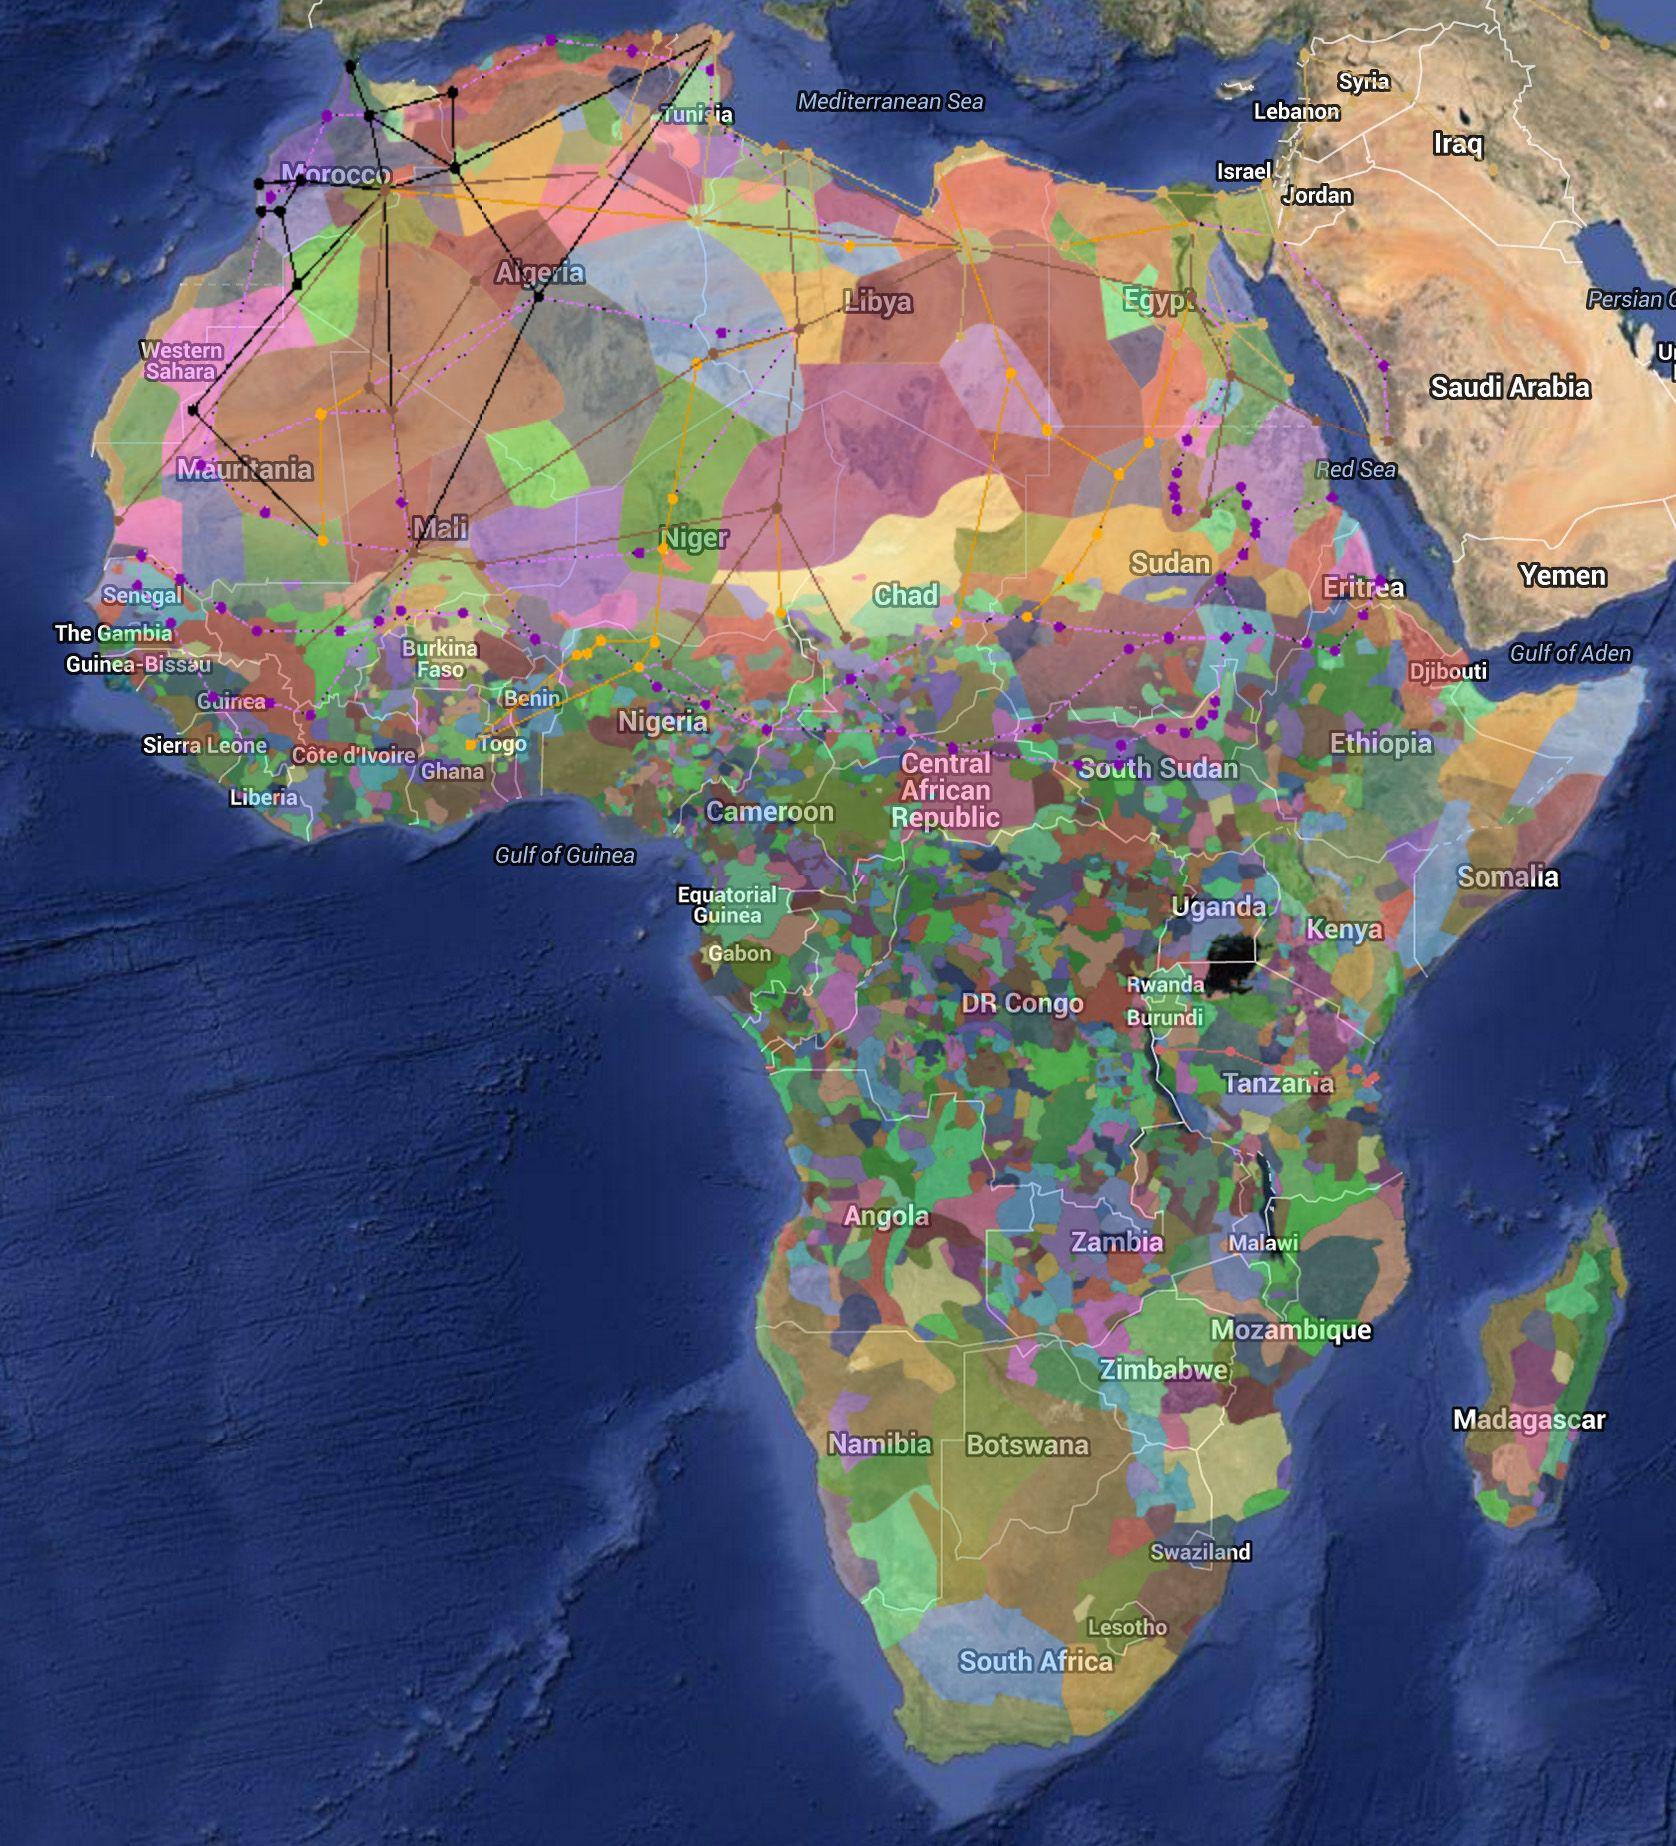 Ethnic Color Earth Logo - A fascinating color-coded map of Africa's diversity - Vox